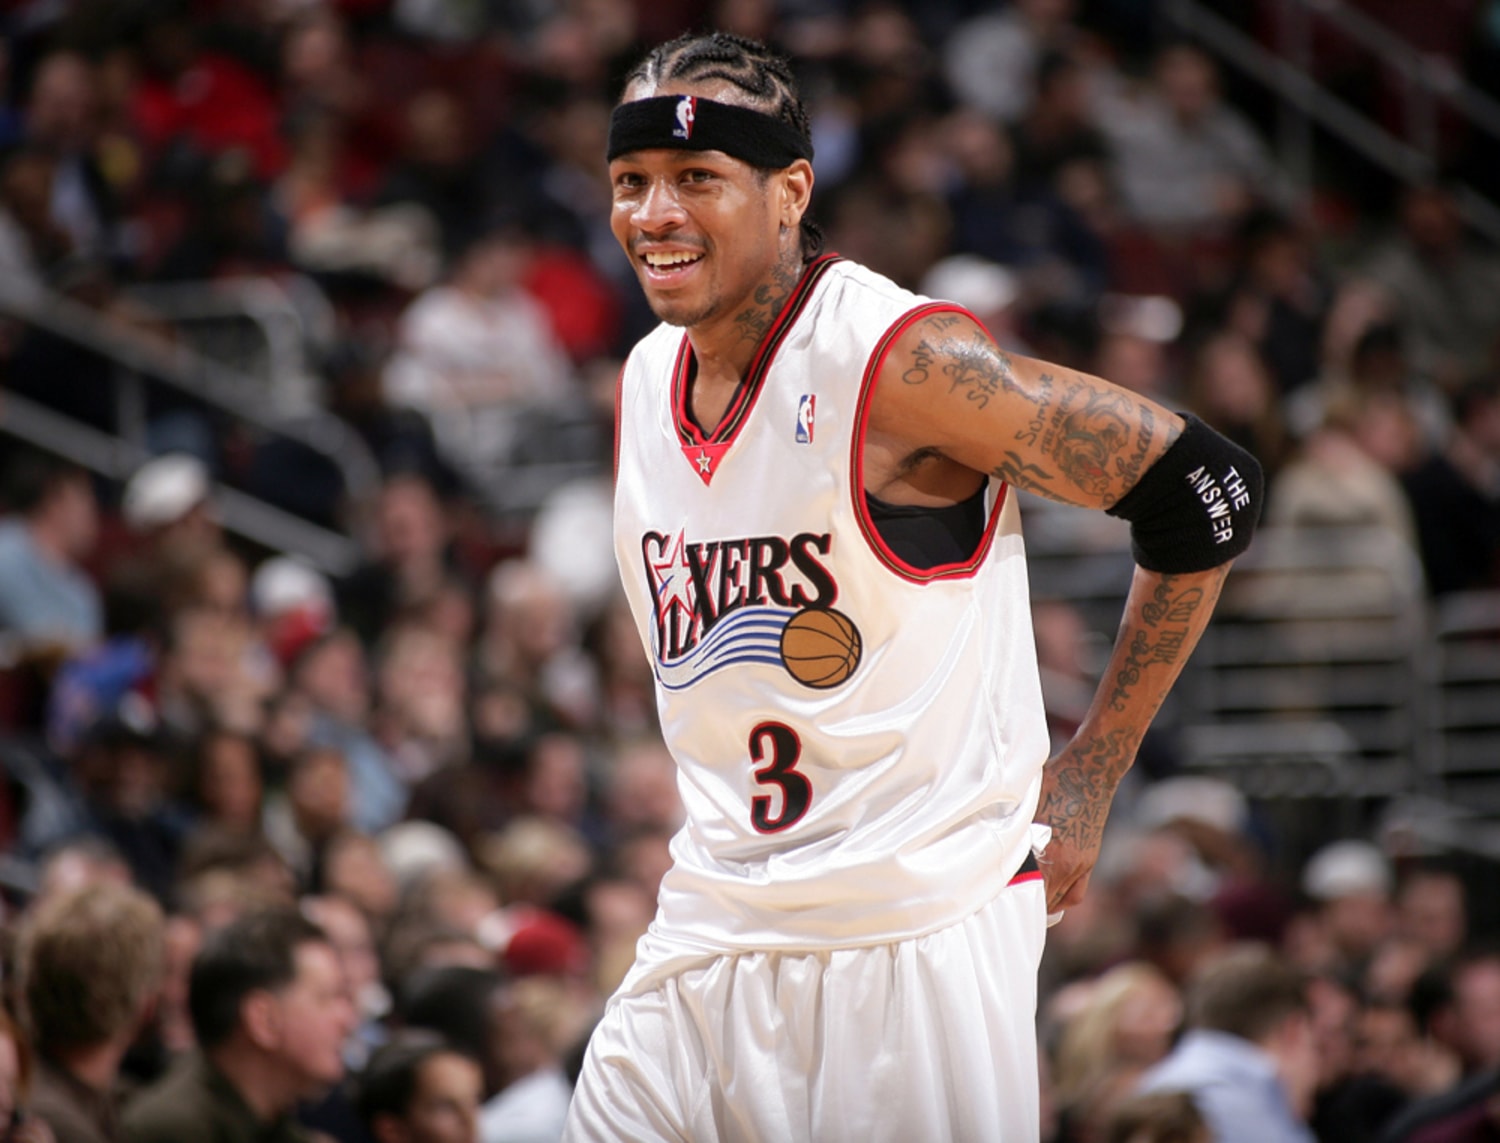 Peacock Taps Allen Iverson to Sell Streaming to Sports Fans